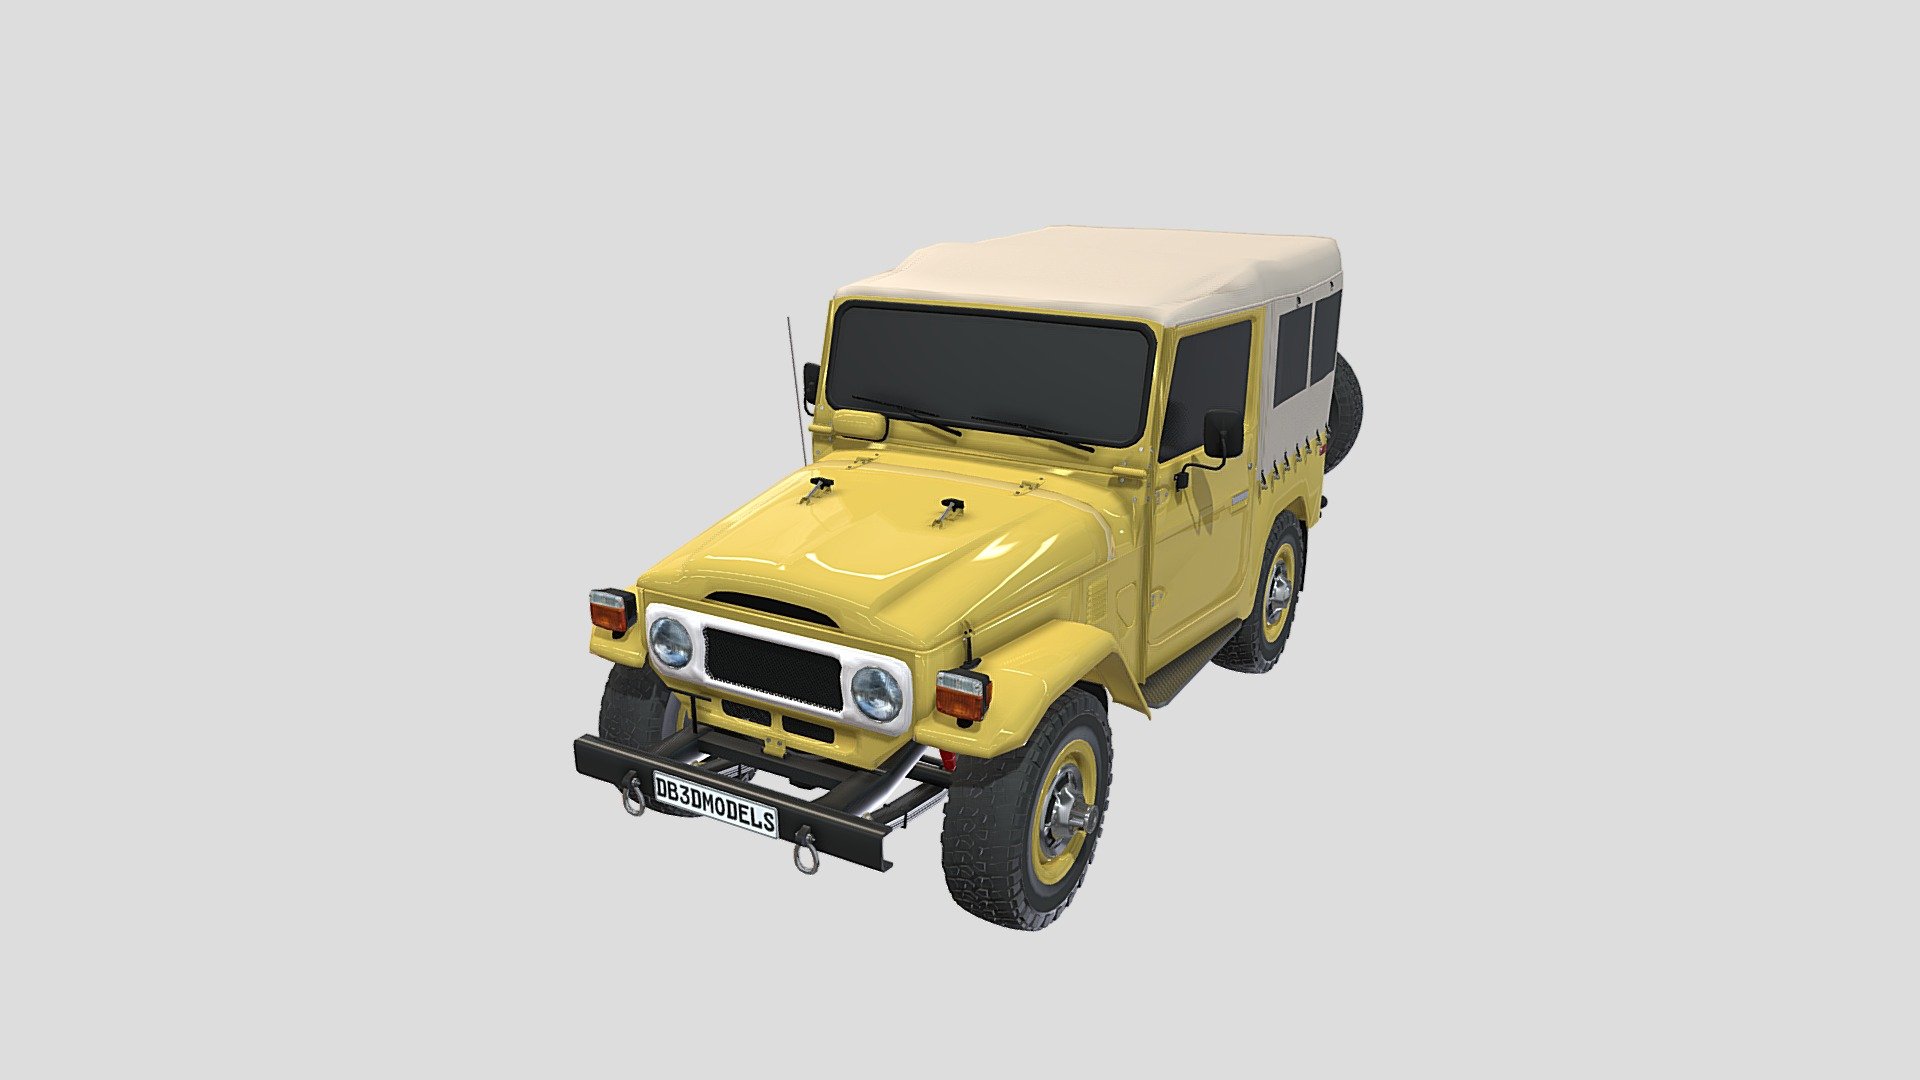 Highly detailed Generic 4x4 3d model rendered with Cycles in Blender, as per seen on attached images. 
The 3d model is scaled to original size in Blender.

File formats:
-.blend, rendered with cycles, as seen in the images;
-.obj, with materials applied;
-.dae, with materials applied;
-.fbx, with materials applied;
-.stl;

Files come named appropriately and split by file format.

3D Software:
The 3D model was originally created in Blender 2.8 and rendered with Cycles.

Materials and textures:
The models have materials applied in all formats, and are ready to import and render.
The models come with four png textures(one for the number plate, which can easily be removed).

Preview scenes:
The preview images are rendered in Blender using its built-in render engine &lsquo;Cycles'.
Note that the blend files come directly with the rendering scene included and the render command will generate the exact result as seen in previews.

Don't forget to rate and enjoy! - Generic 4x4 car v2 - Buy Royalty Free 3D model by dragosburian 3d model